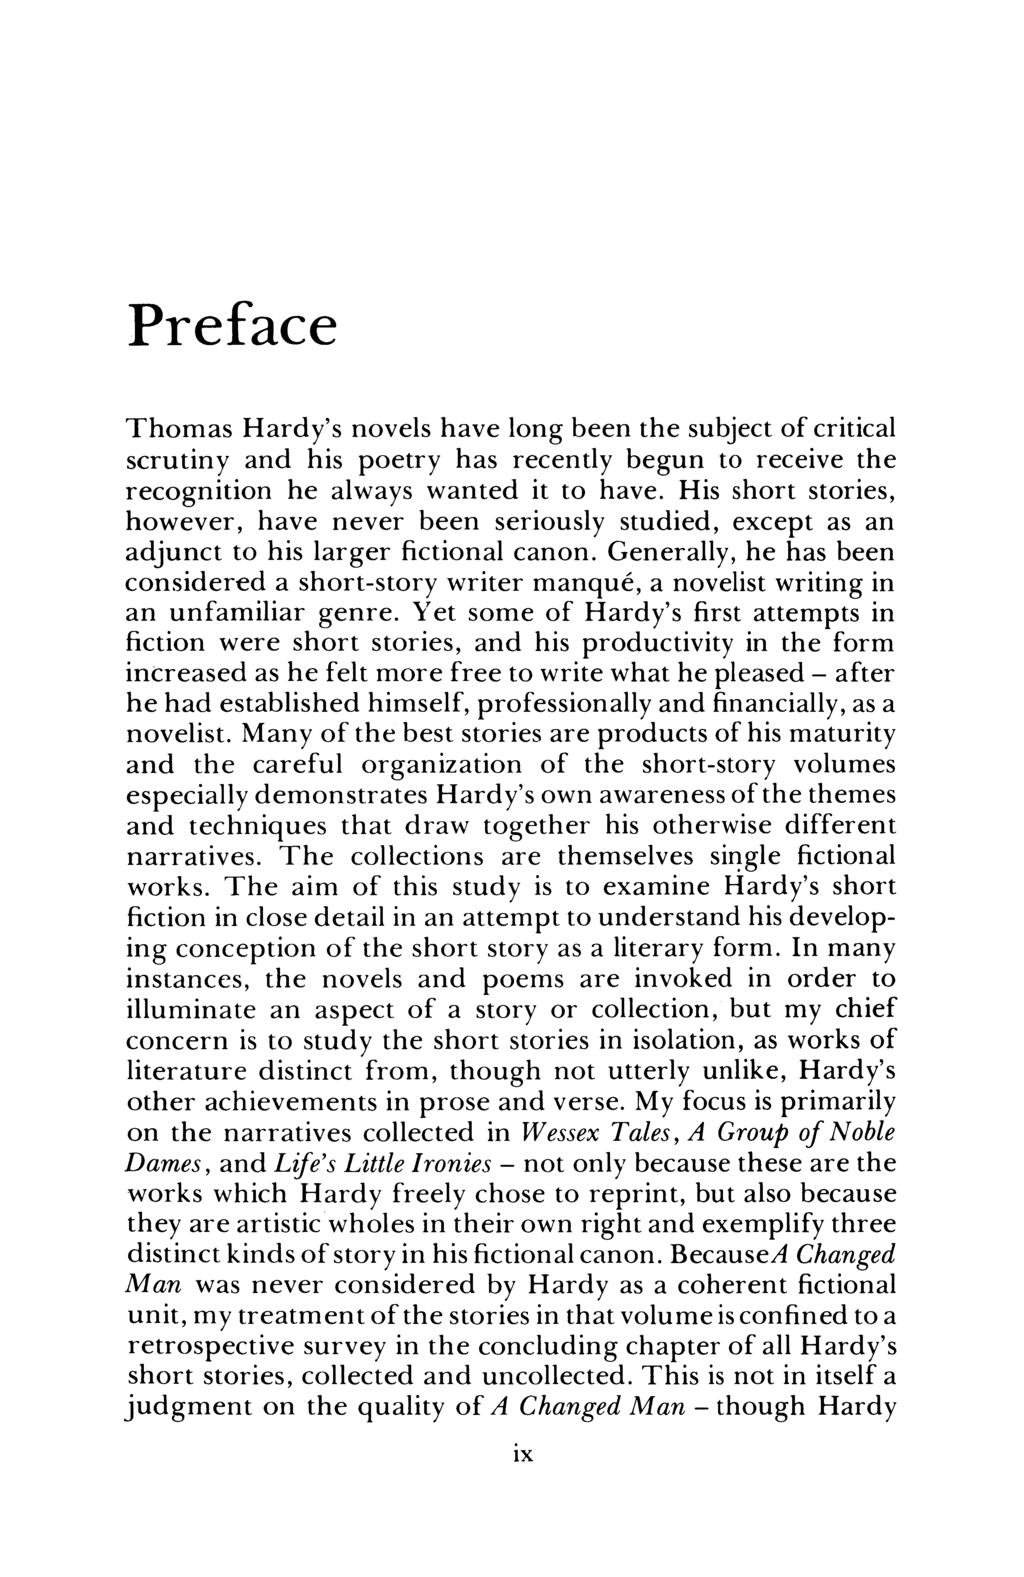 Preface Thomas Hardy's novels have long been the subject of critical scrutiny and his poetry has recently begun to receive the recognition he always wanted it to have.